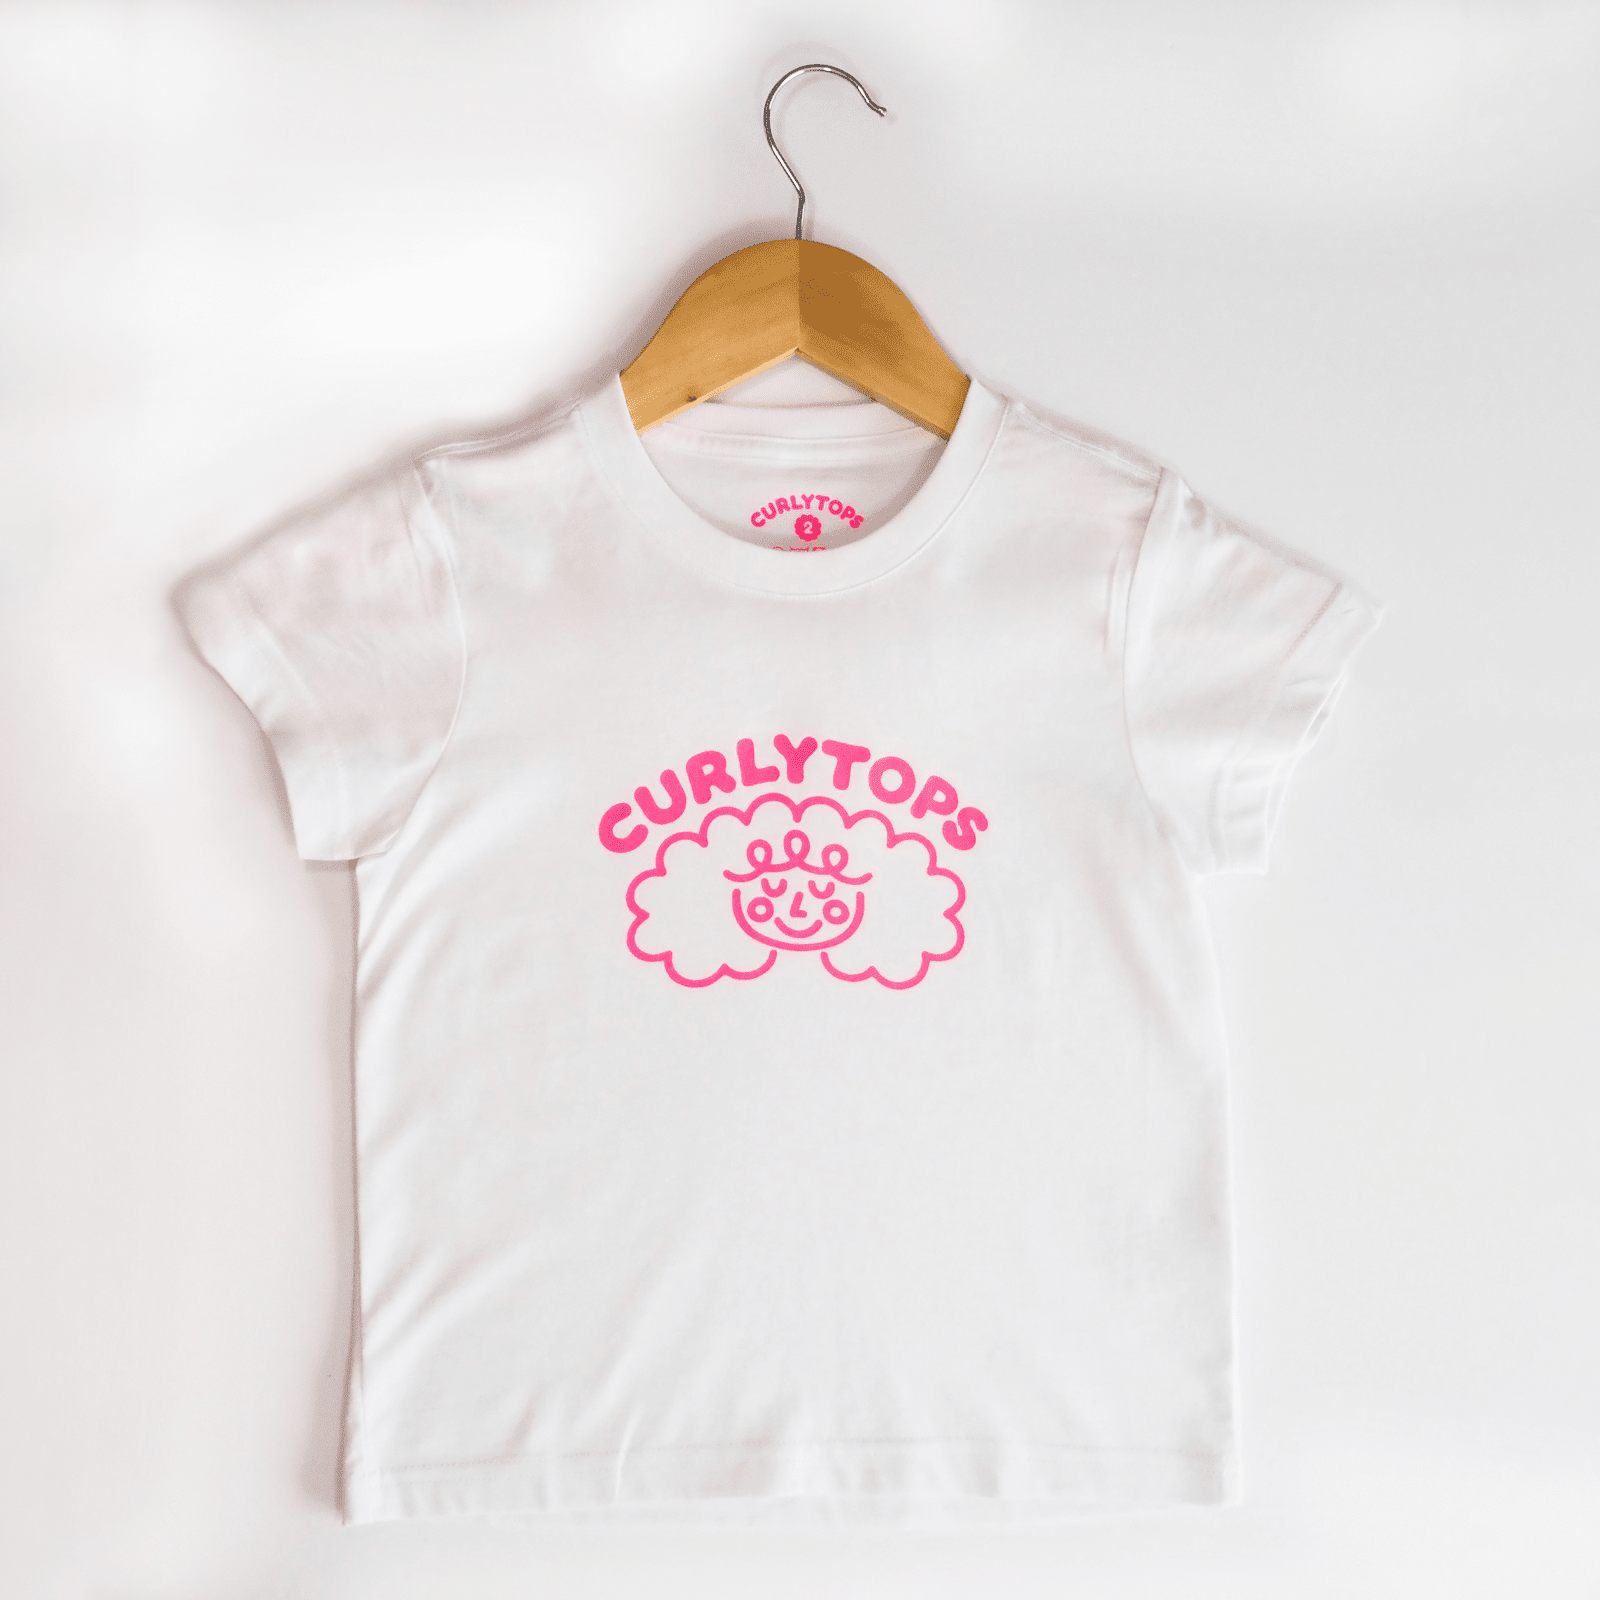 Curlytops White T-shirt for people with Curly Hair